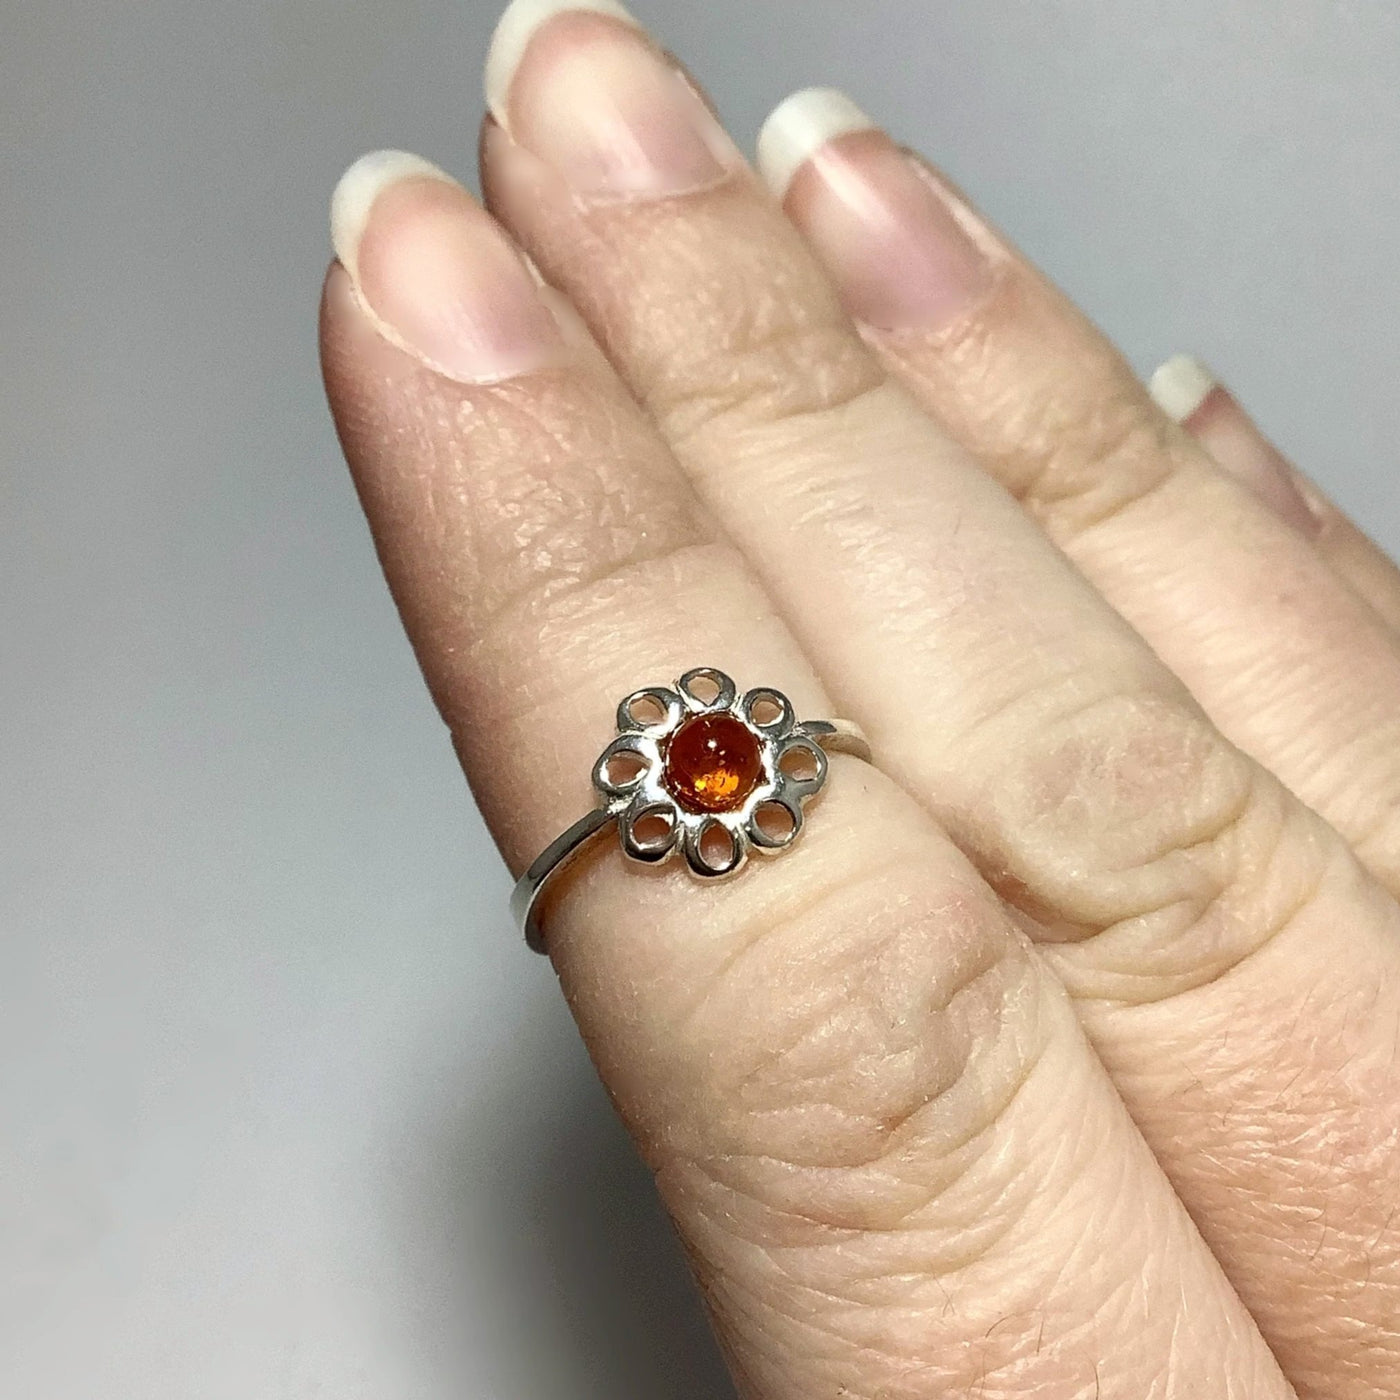 Cognac Amber Ring - Small Sizes